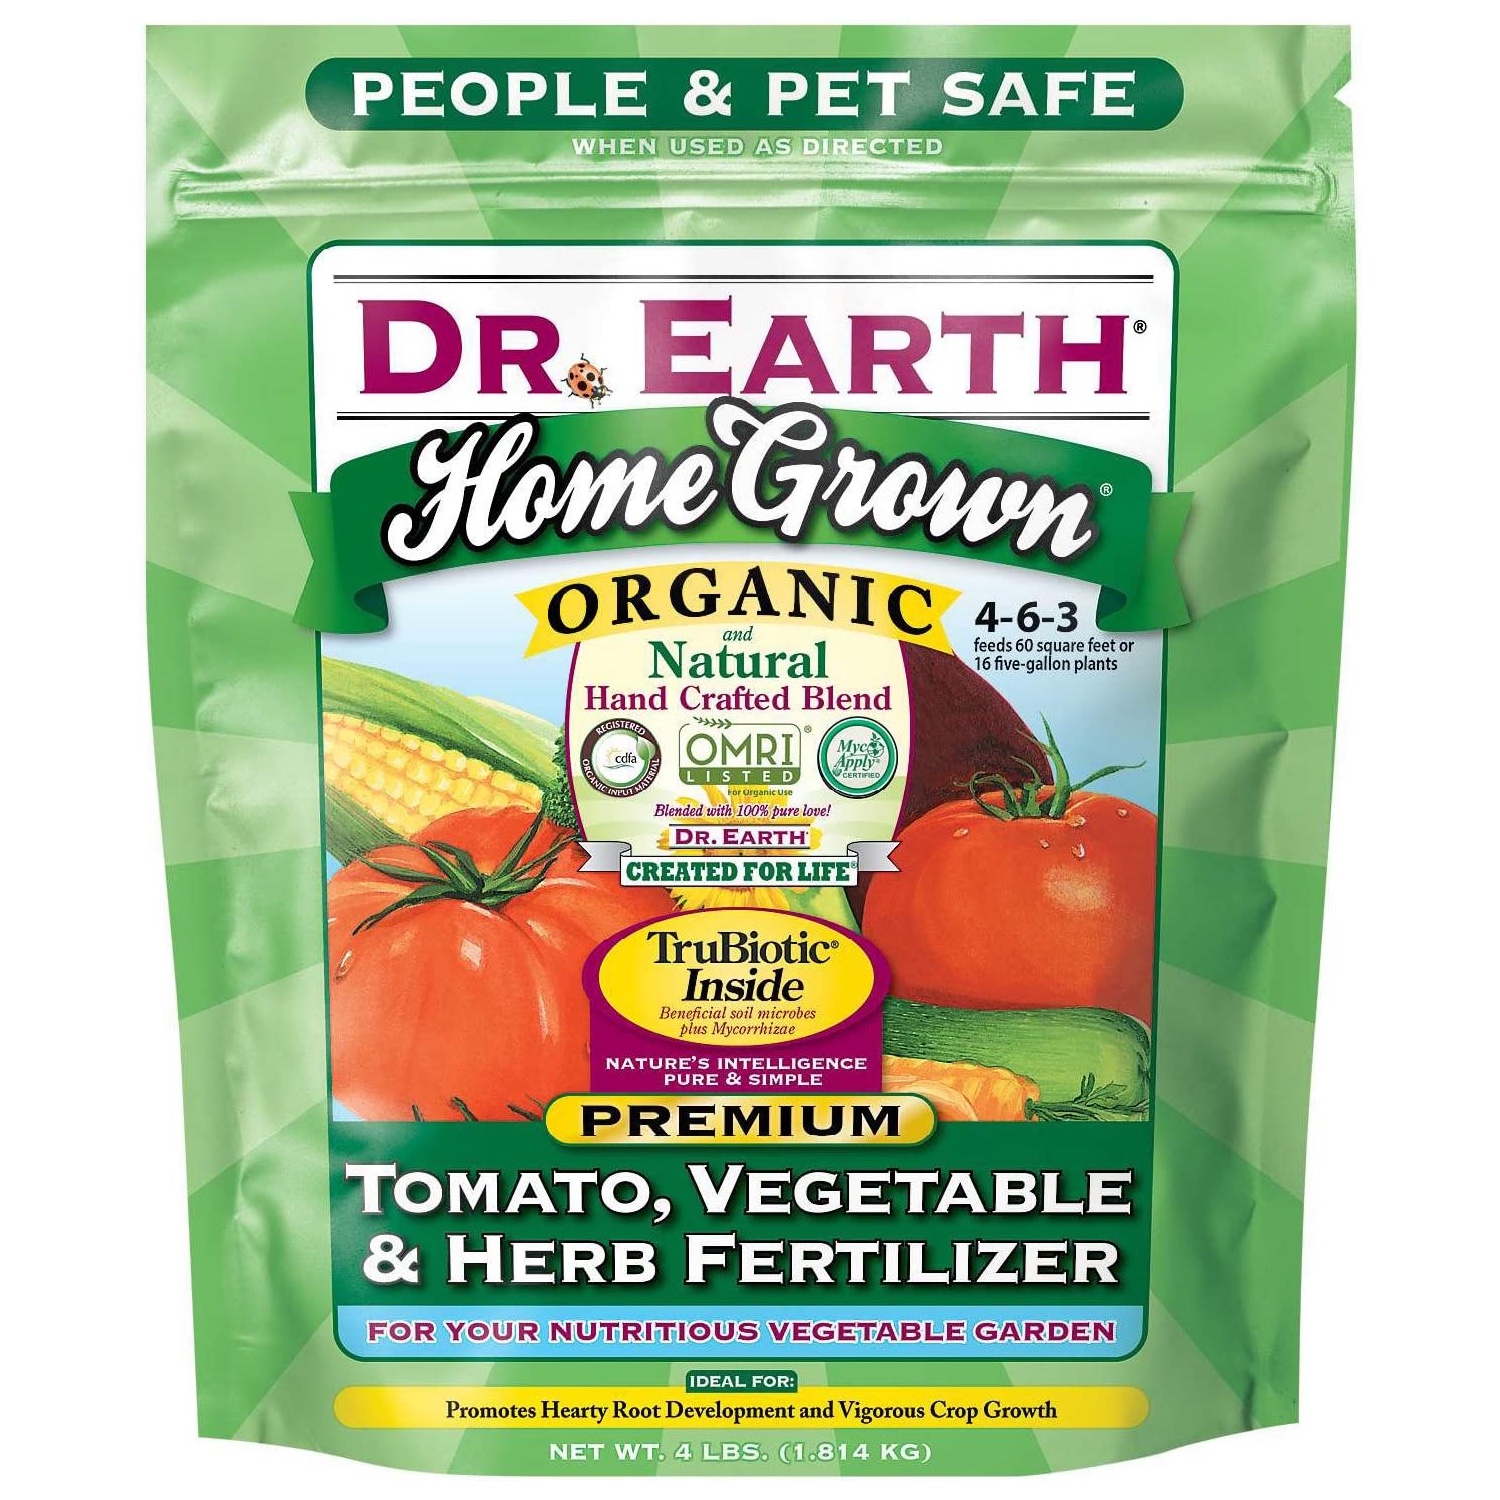 Dr. Earth Organic and Natural Home Grown Fertilizer